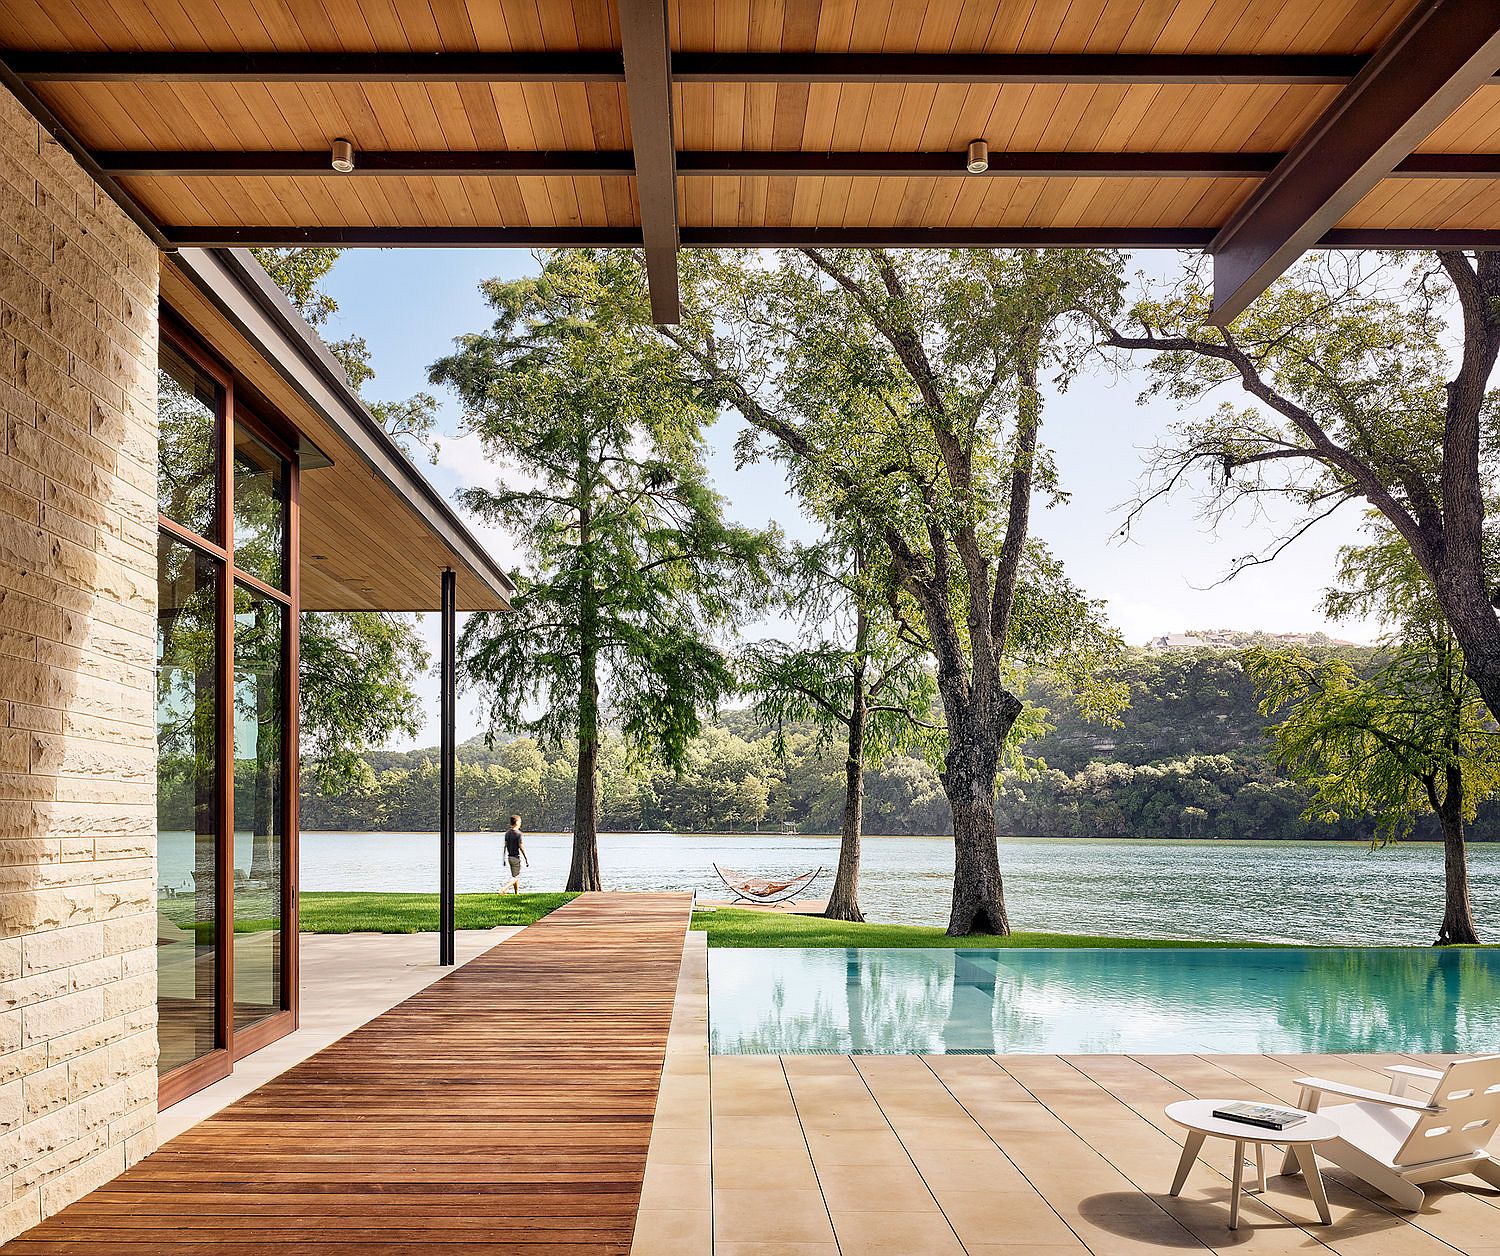 Fabulous-views-of-the-lake-from-the-house-and-its-sweeping-deck